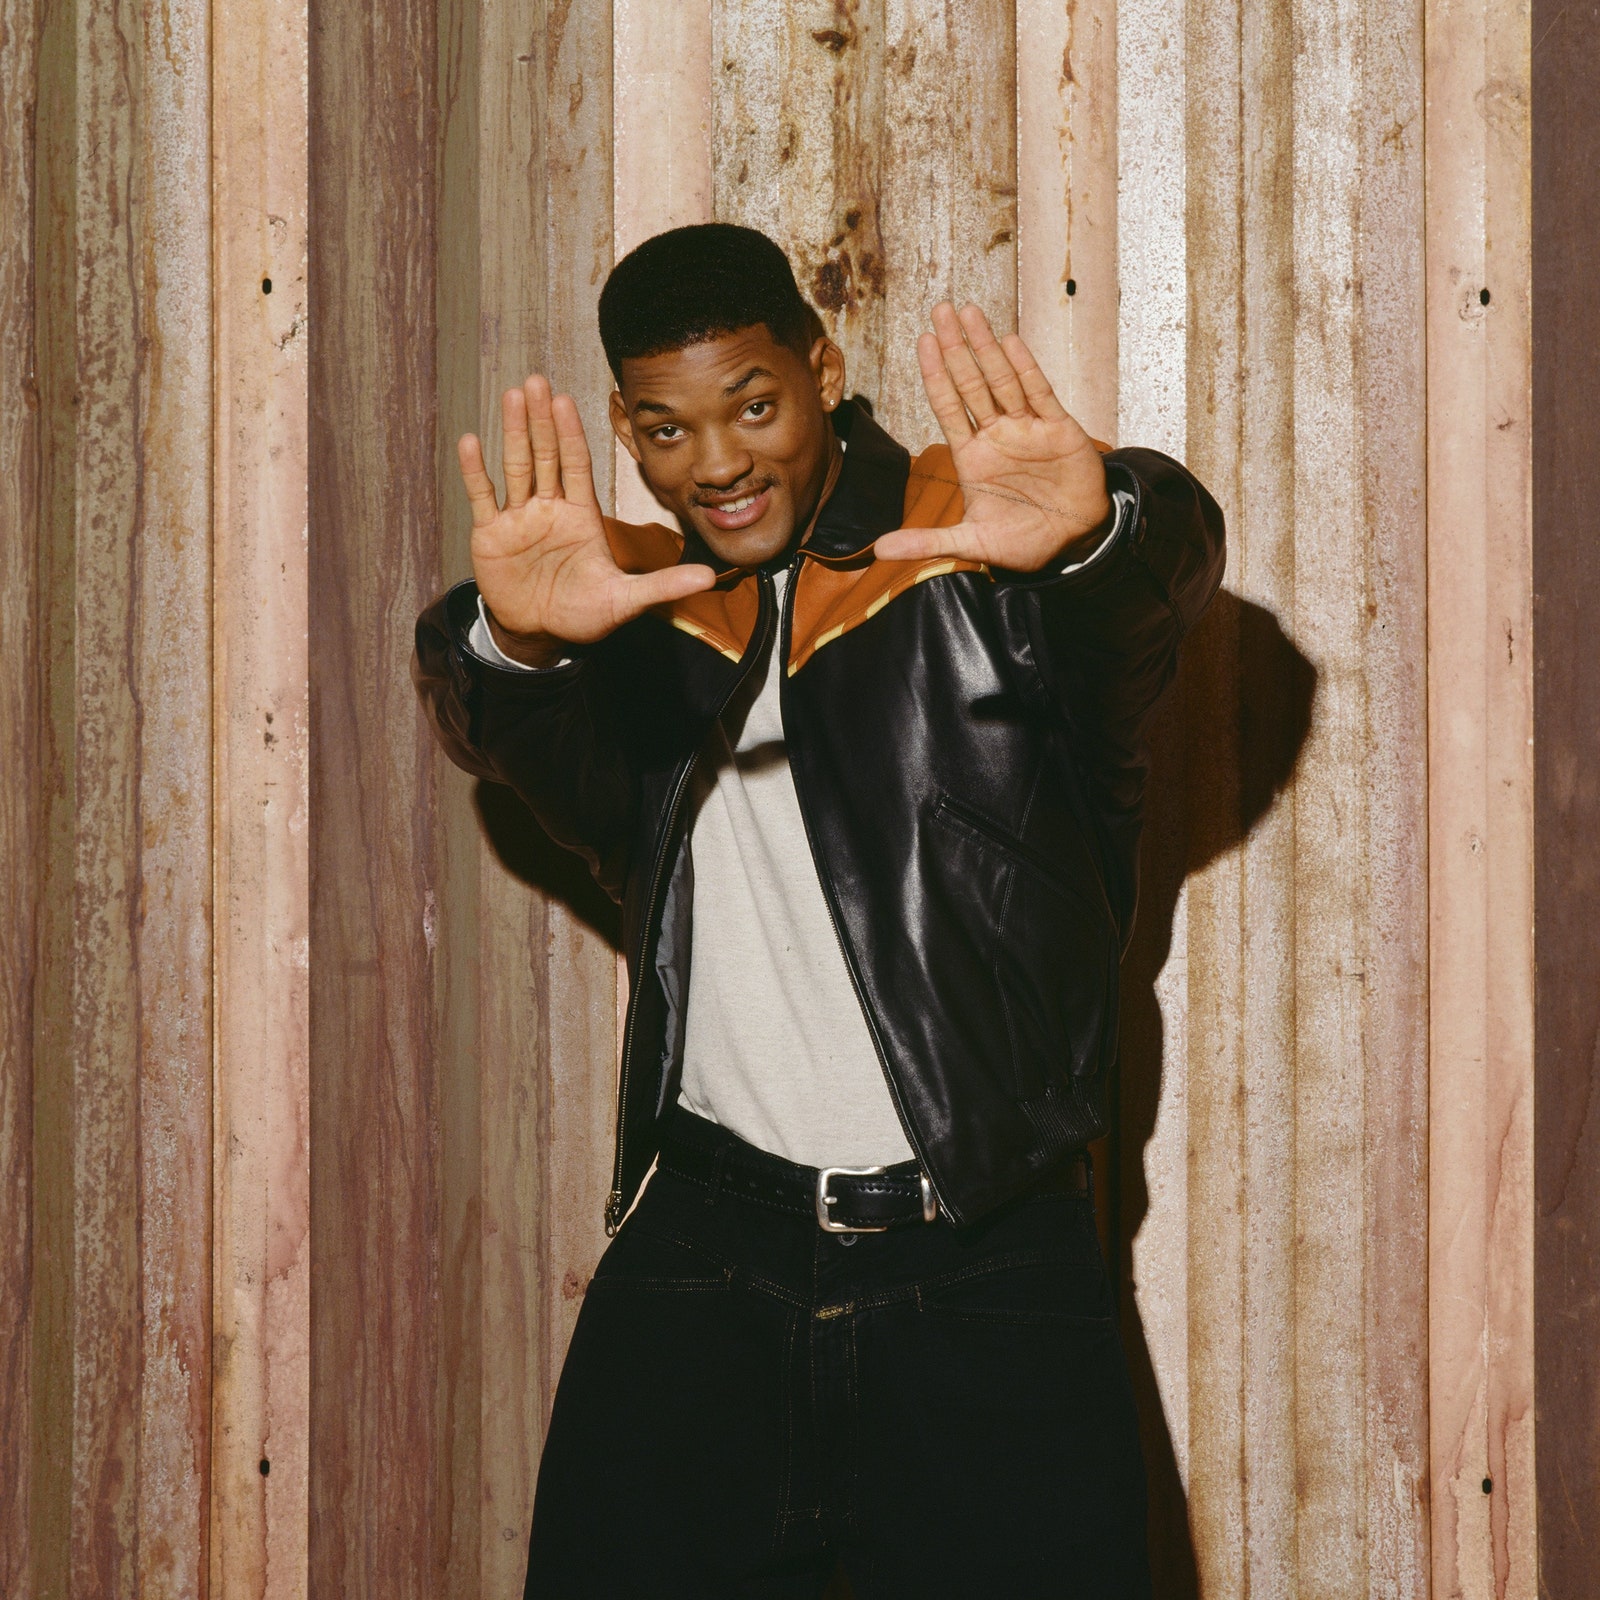 Will Smith debout les mains leves vers la camra.